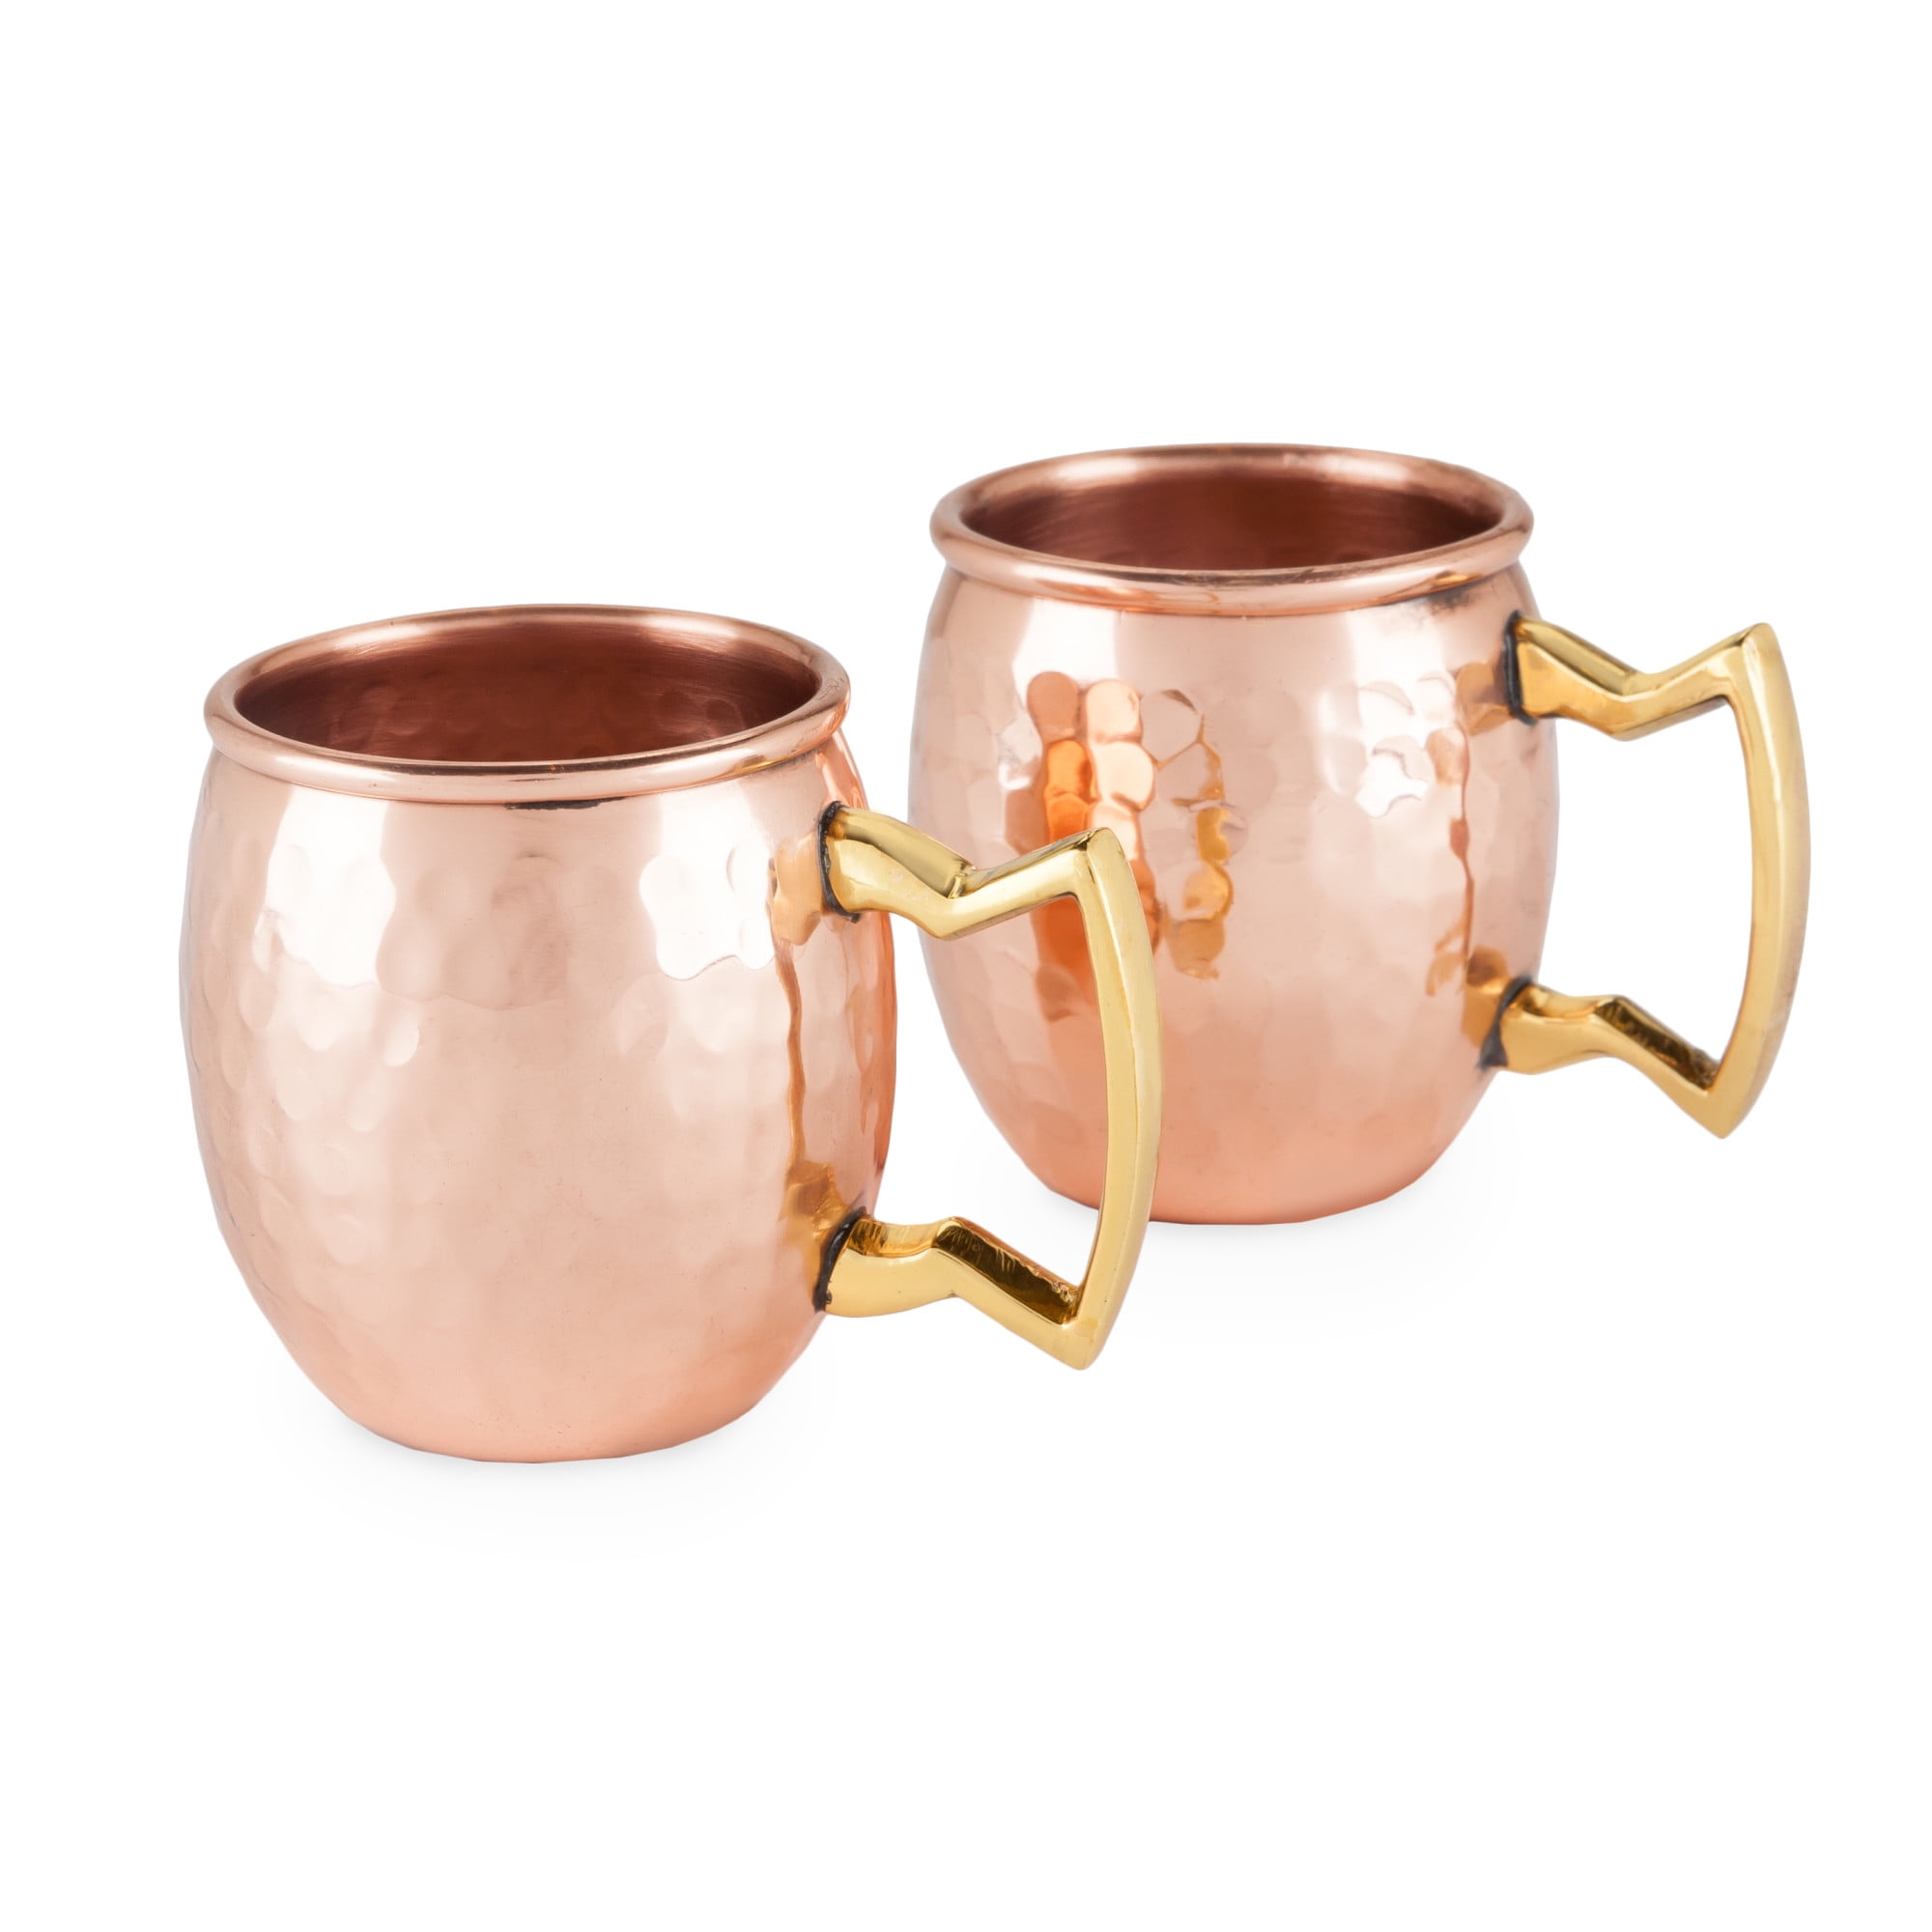 Details about   100% Copper Water Jug Pot With 2 Copper Moscow Mule Mug Premium Hammered Finish 